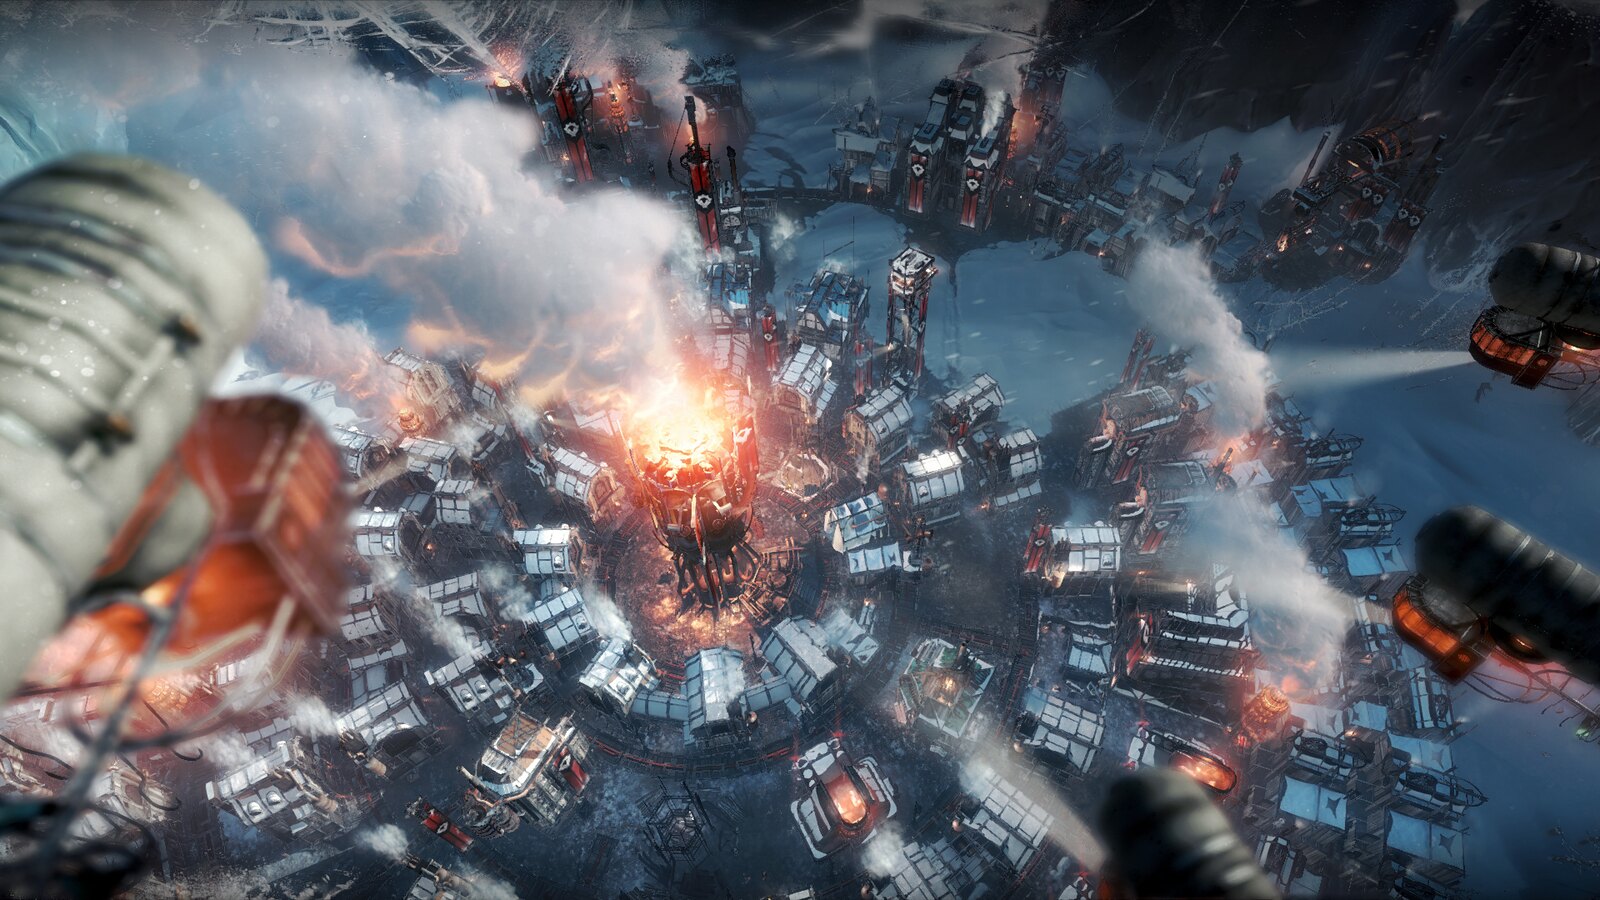 Frostpunk: Console Edition for PS4 and Xbox One launches this Summer